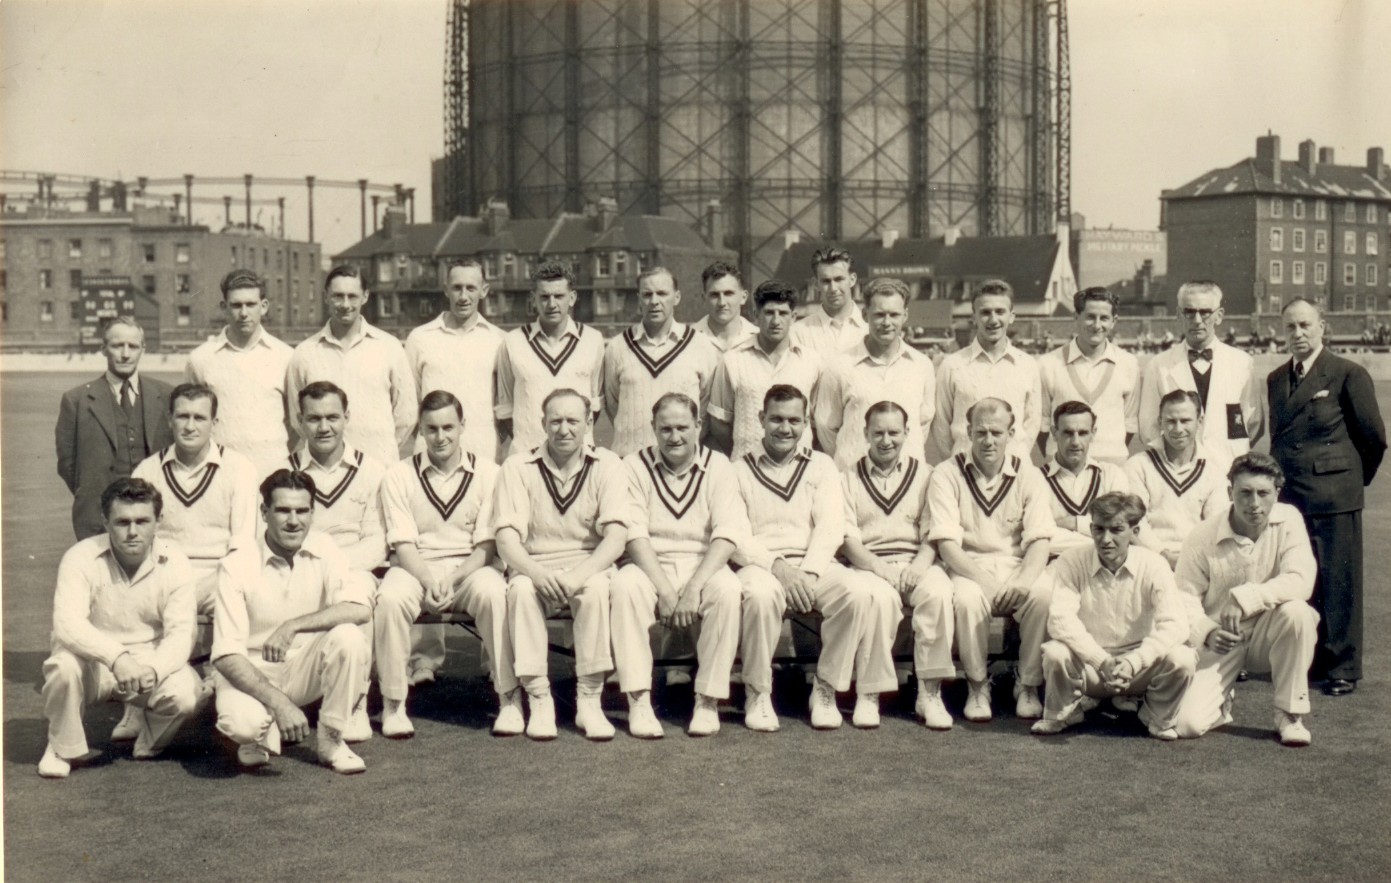 Surrey CCC – looking back to 1954